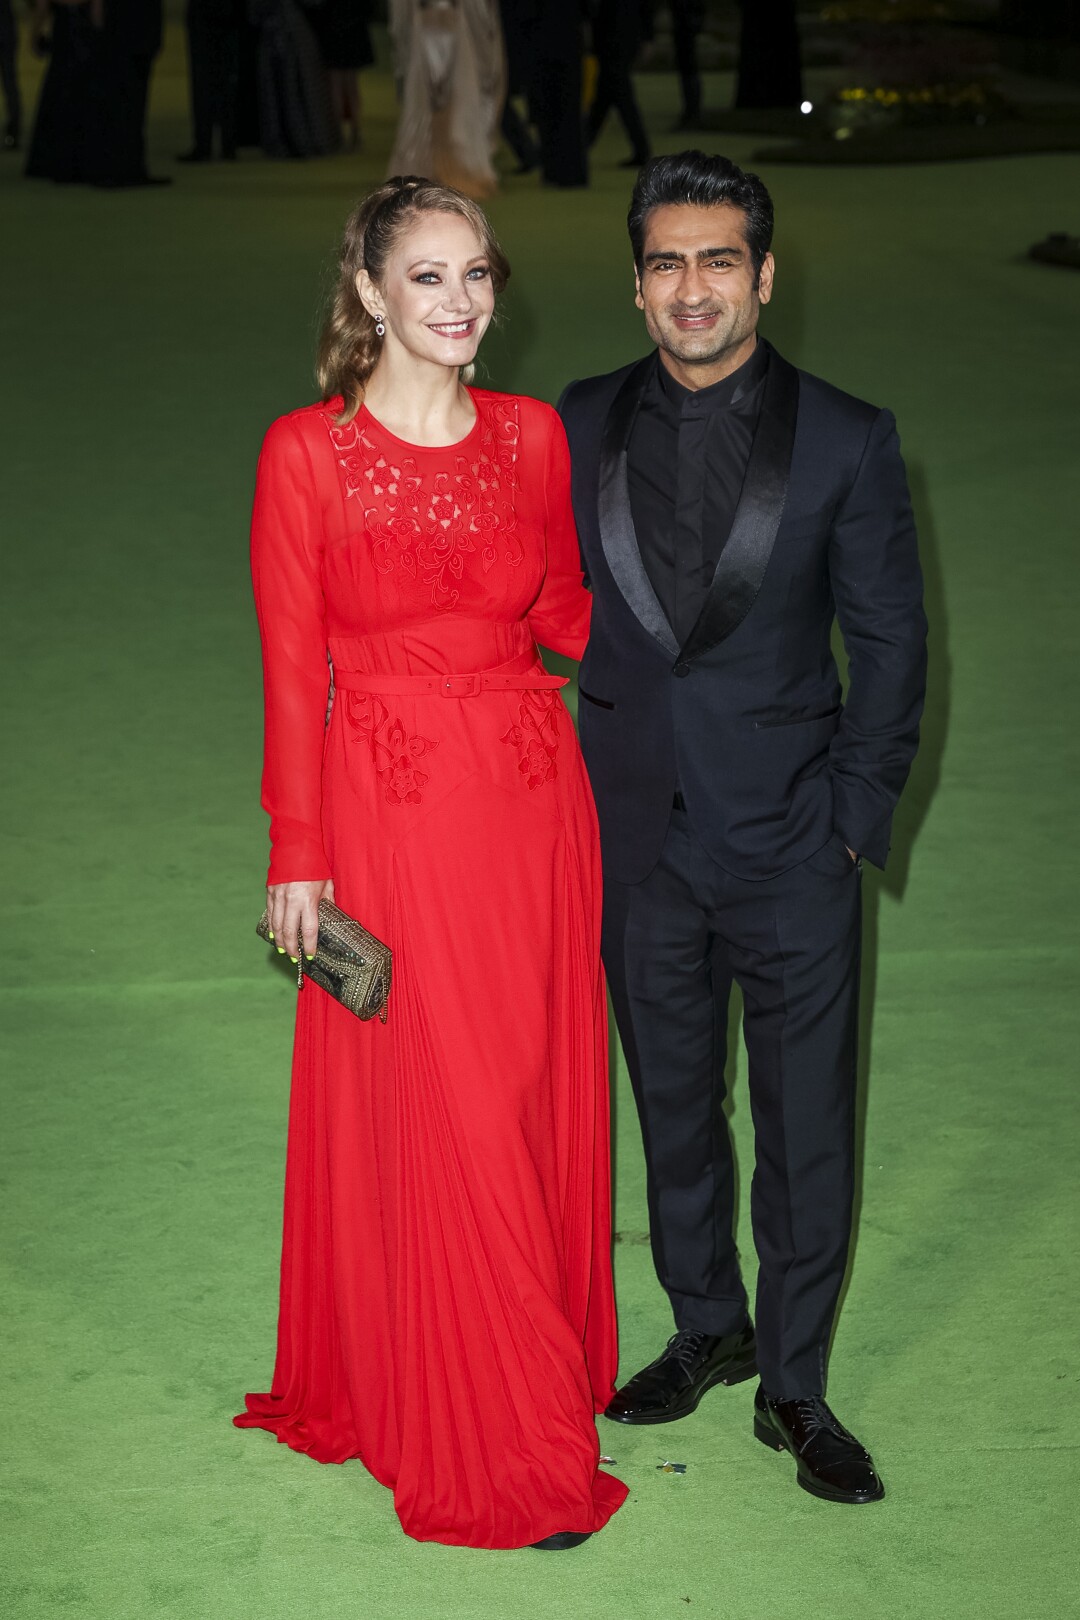 A woman in a red dress and a man in a black suit posing on a green carpet